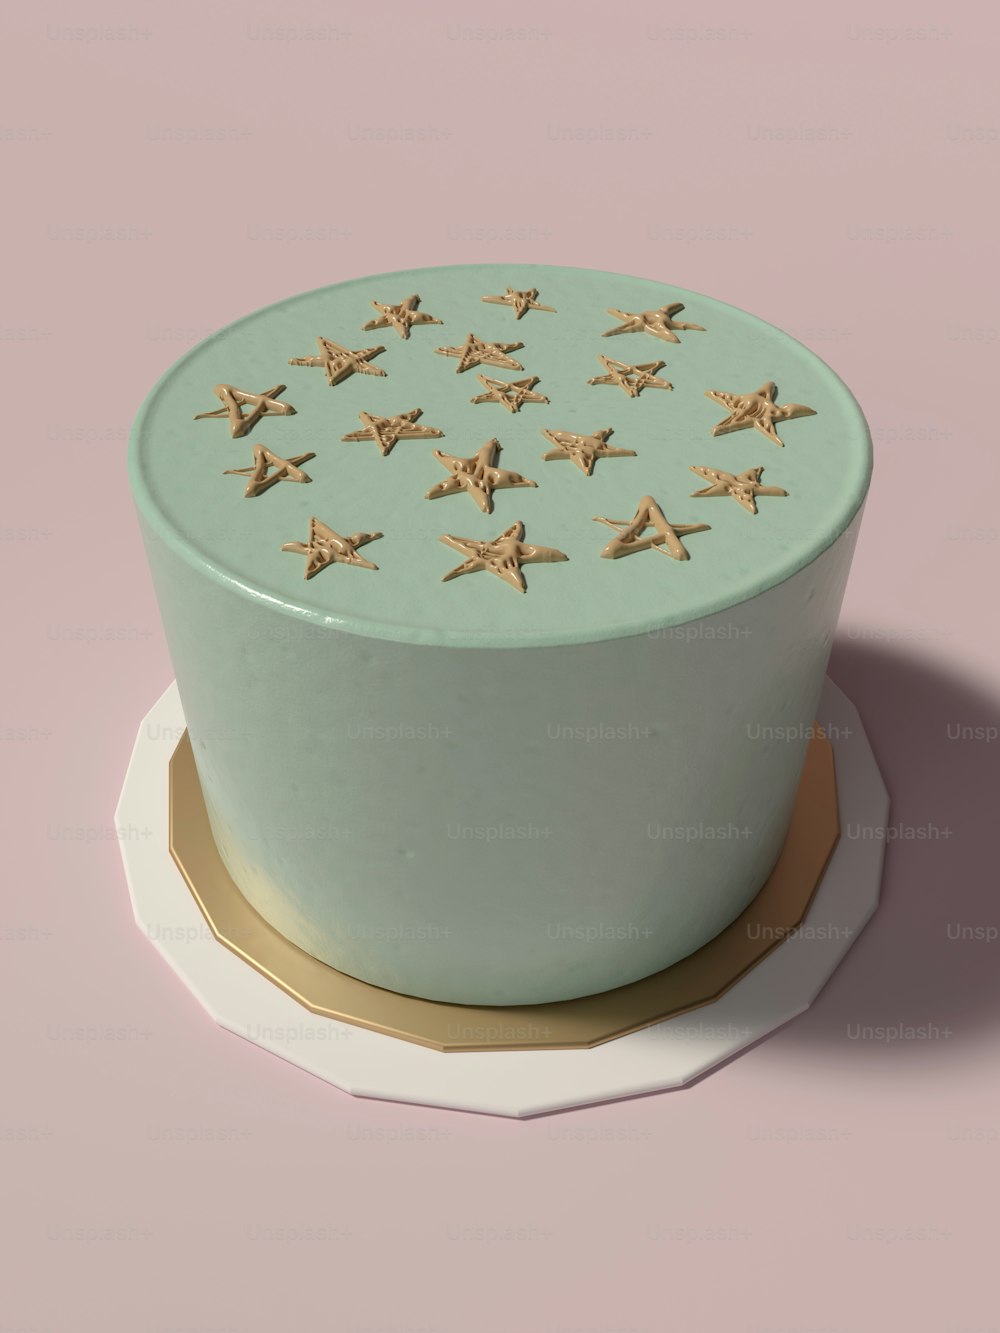 a cake with gold stars on top of it